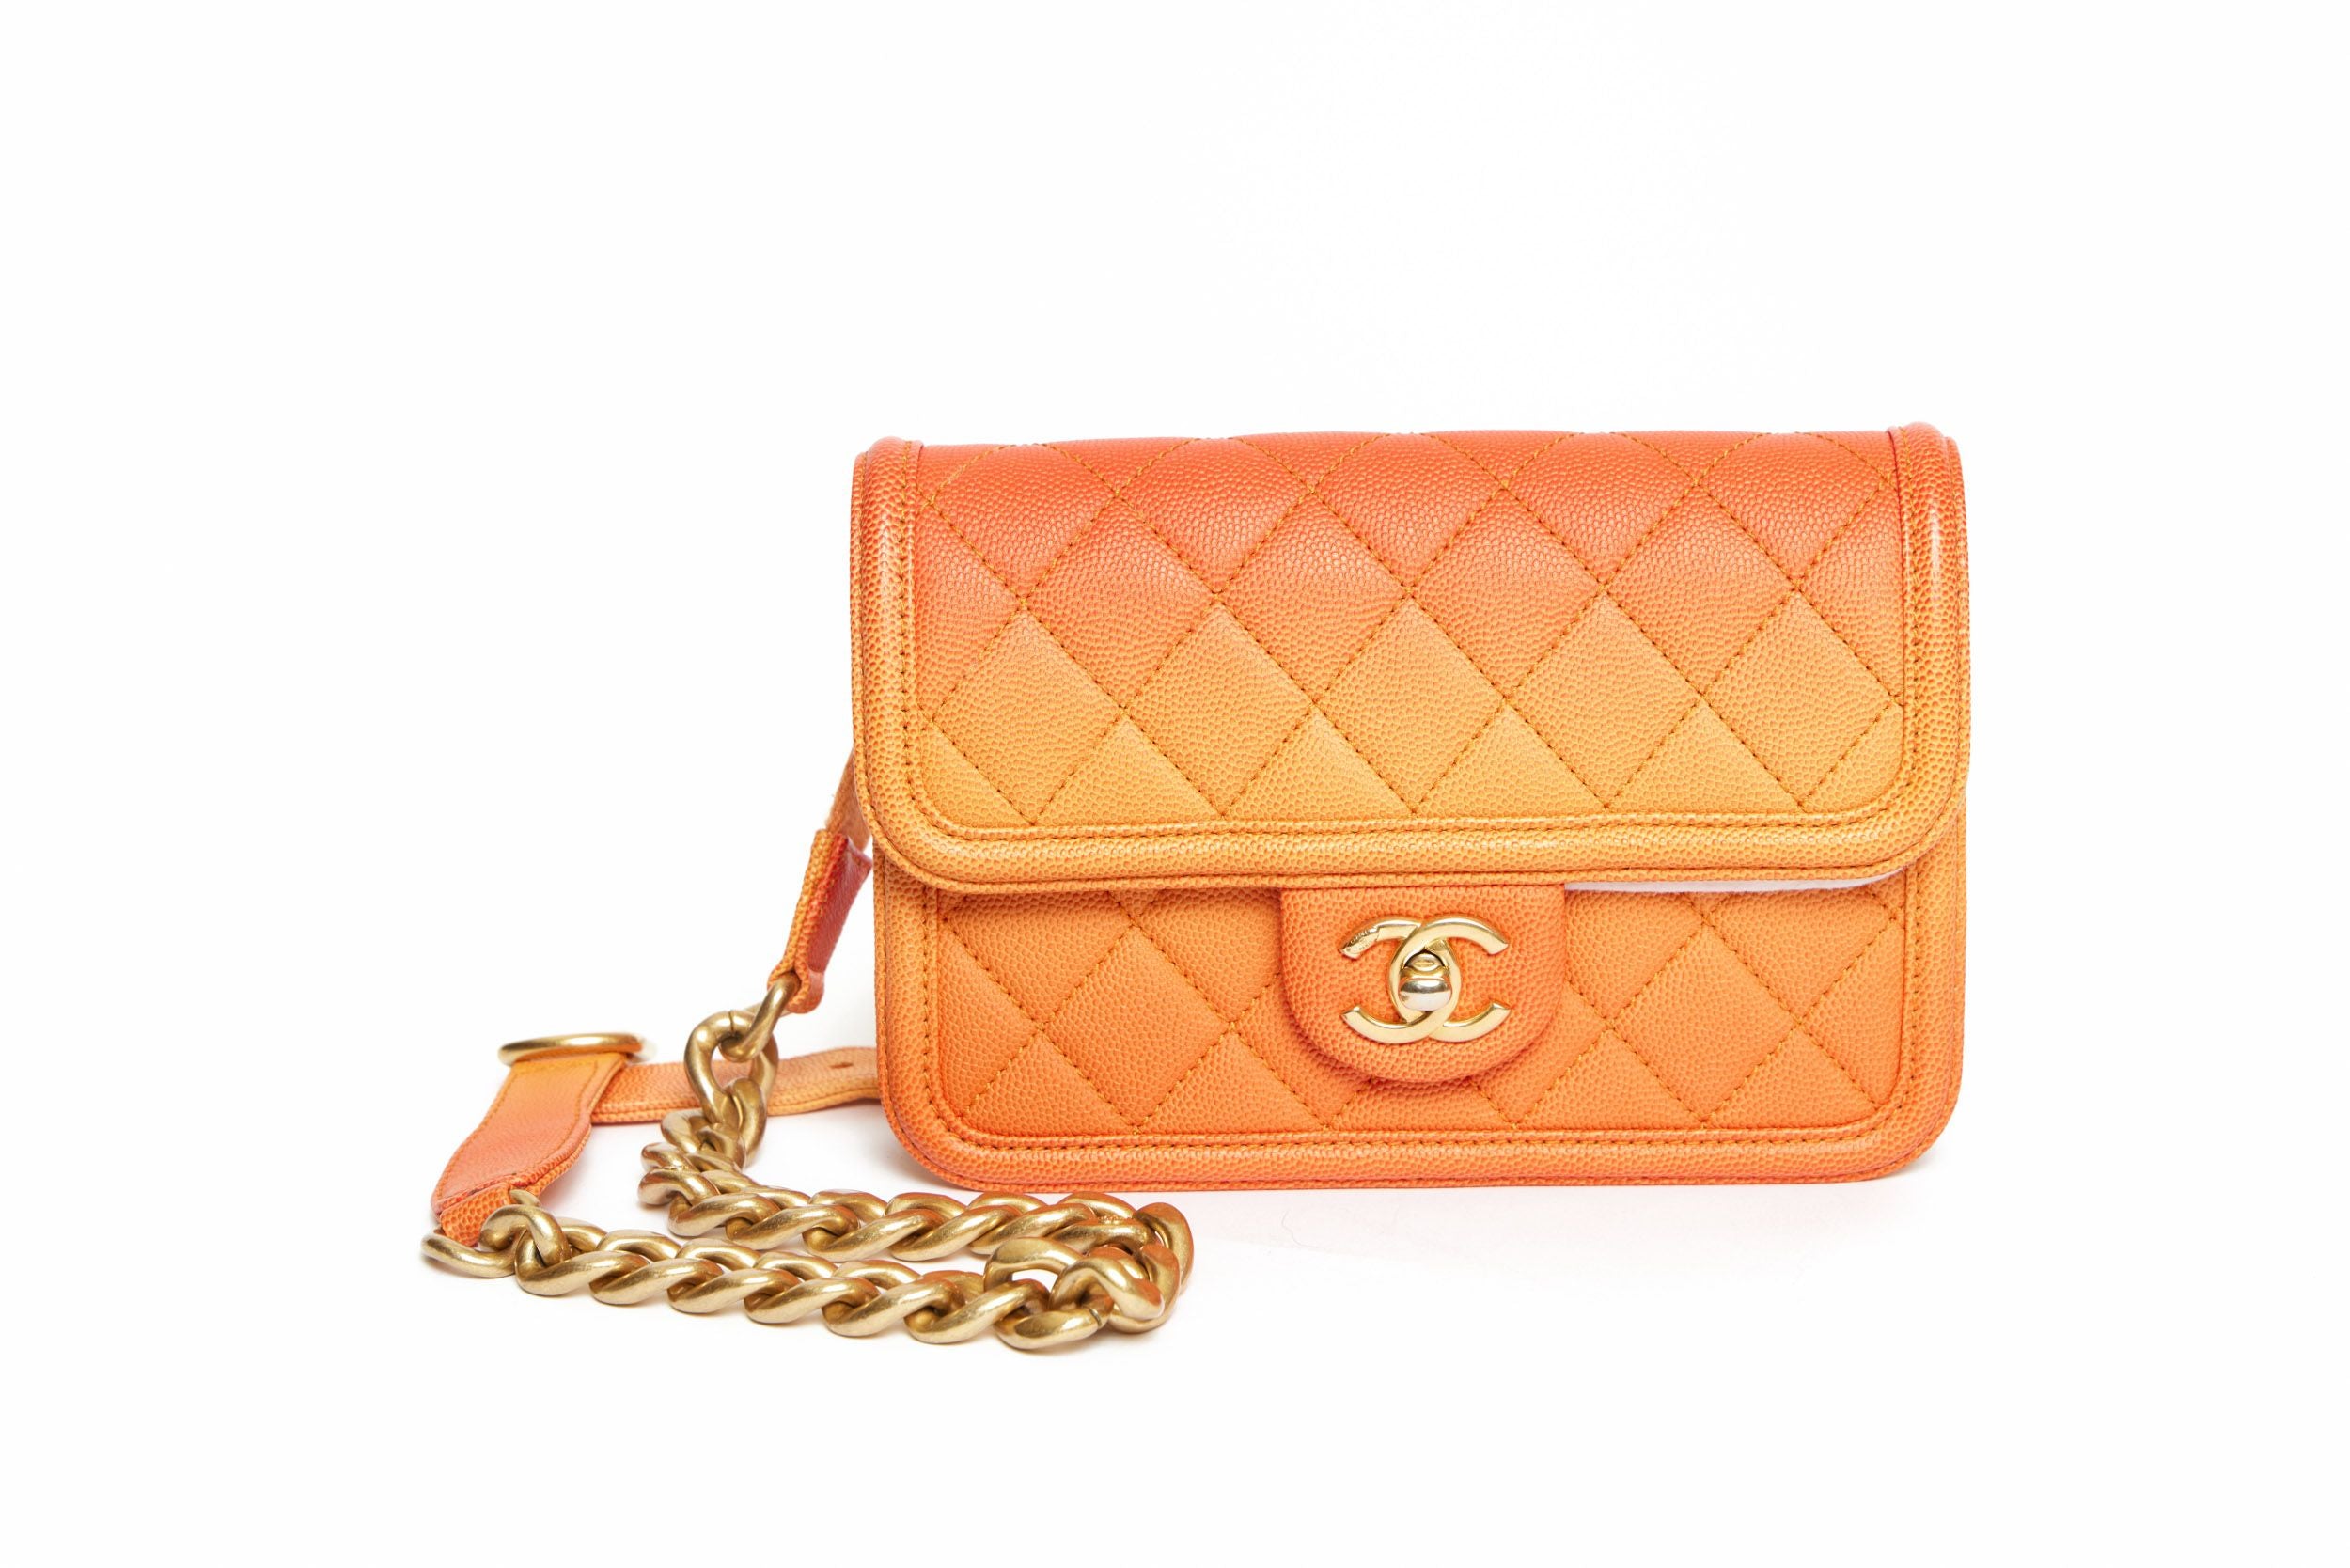 Chanel Neo Executive Small Orange Calf Leather Bag A69929 Luxury Bags   Wallets on Carousell